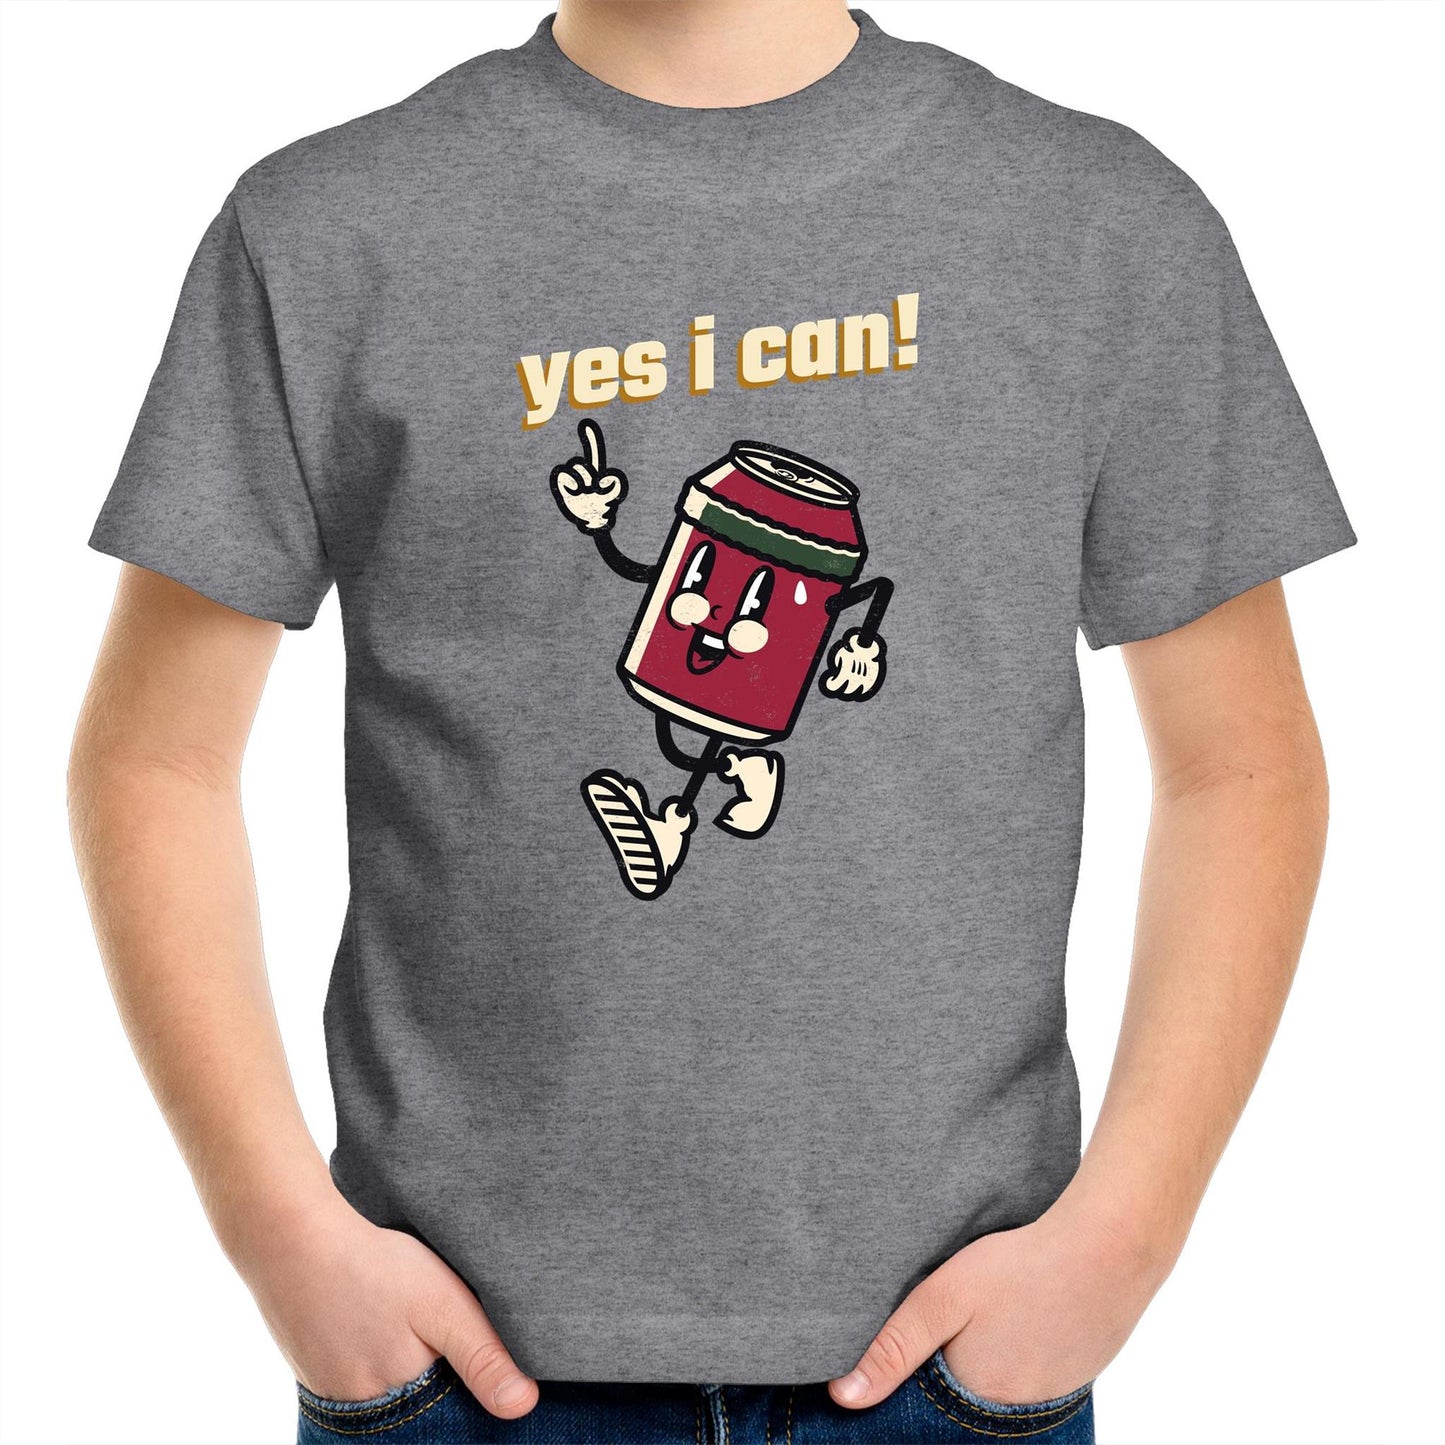 Yes I Can! - Kids Youth Crew T-Shirt Grey Marle Kids Youth T-shirt Motivation Retro